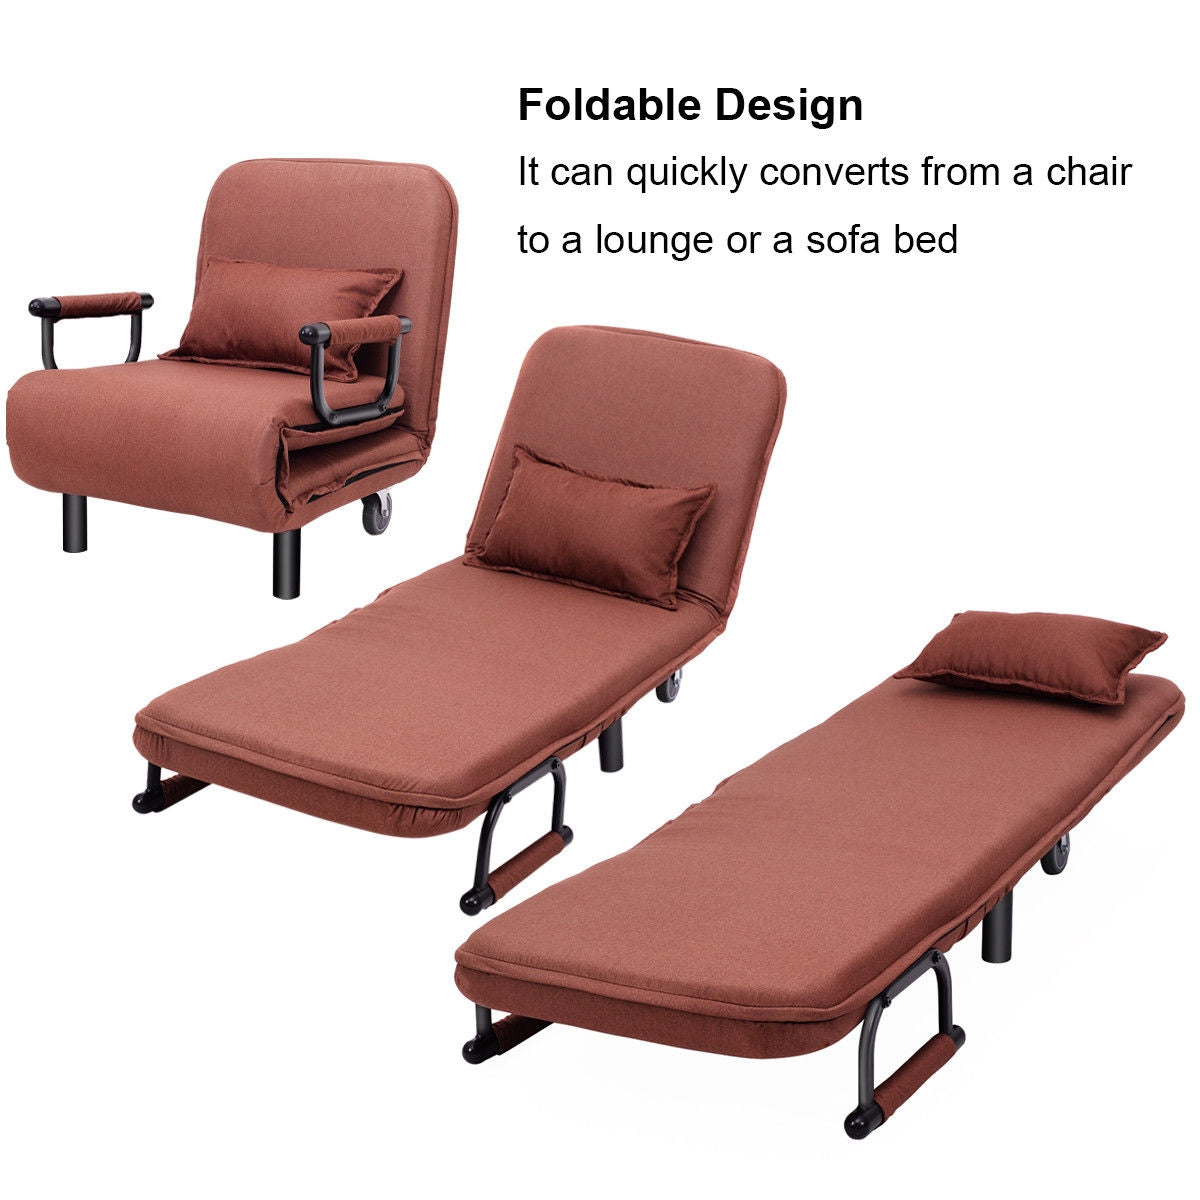 26.5 Inch Folding Leisure Recliner Sofa Bed with silent wheels & adjustable backrest